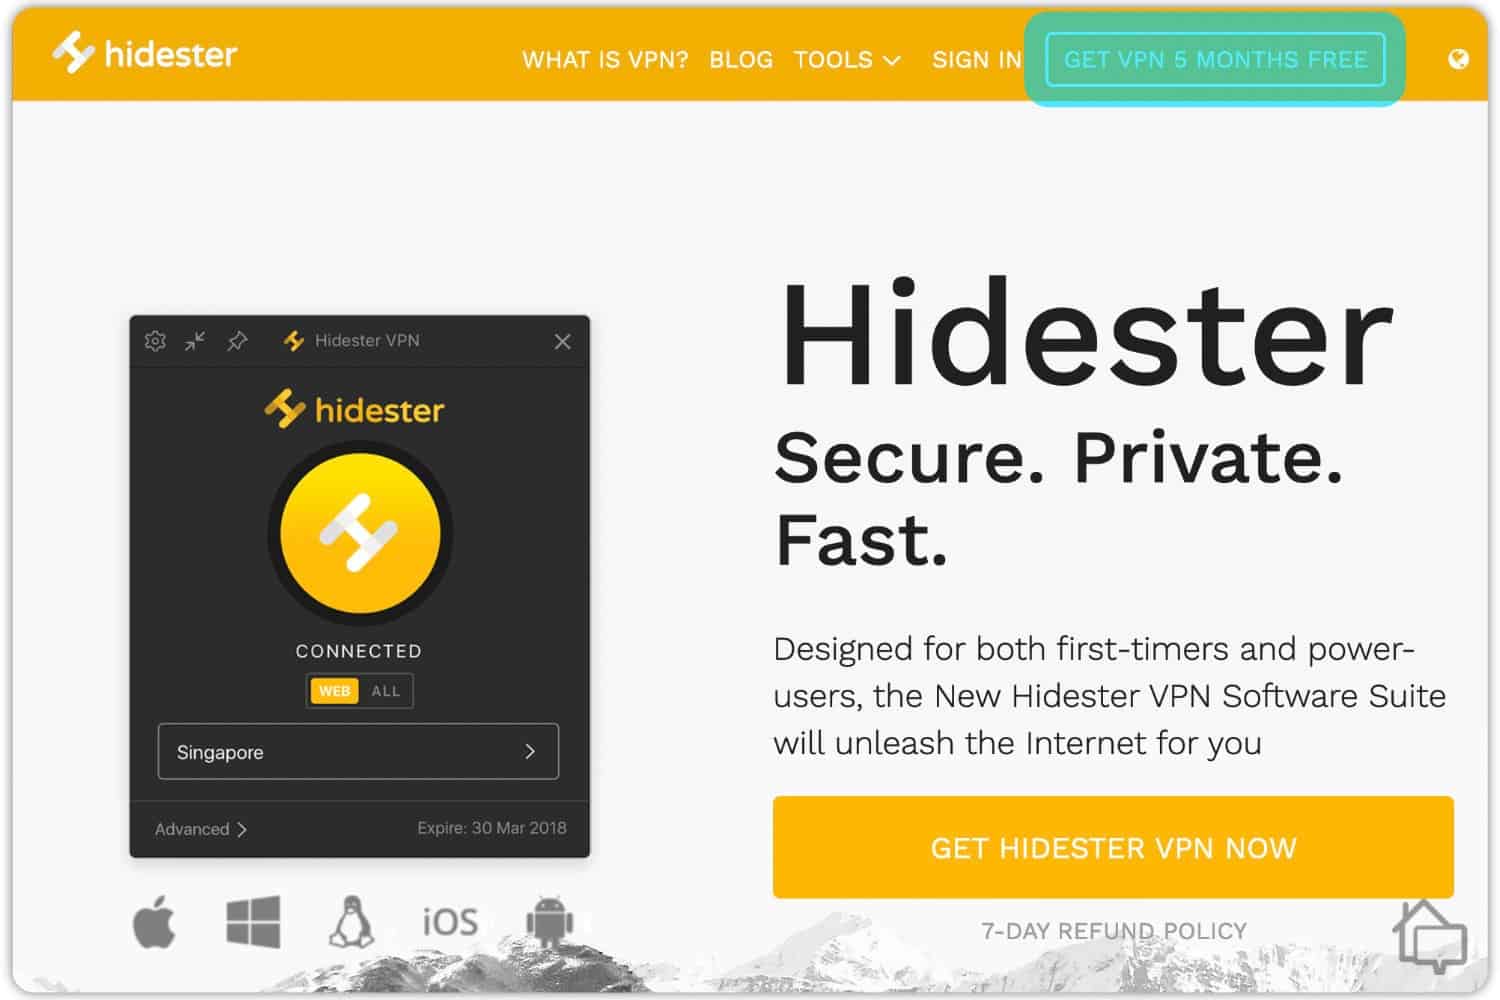 This is not the Hidester VPN I was looking for.